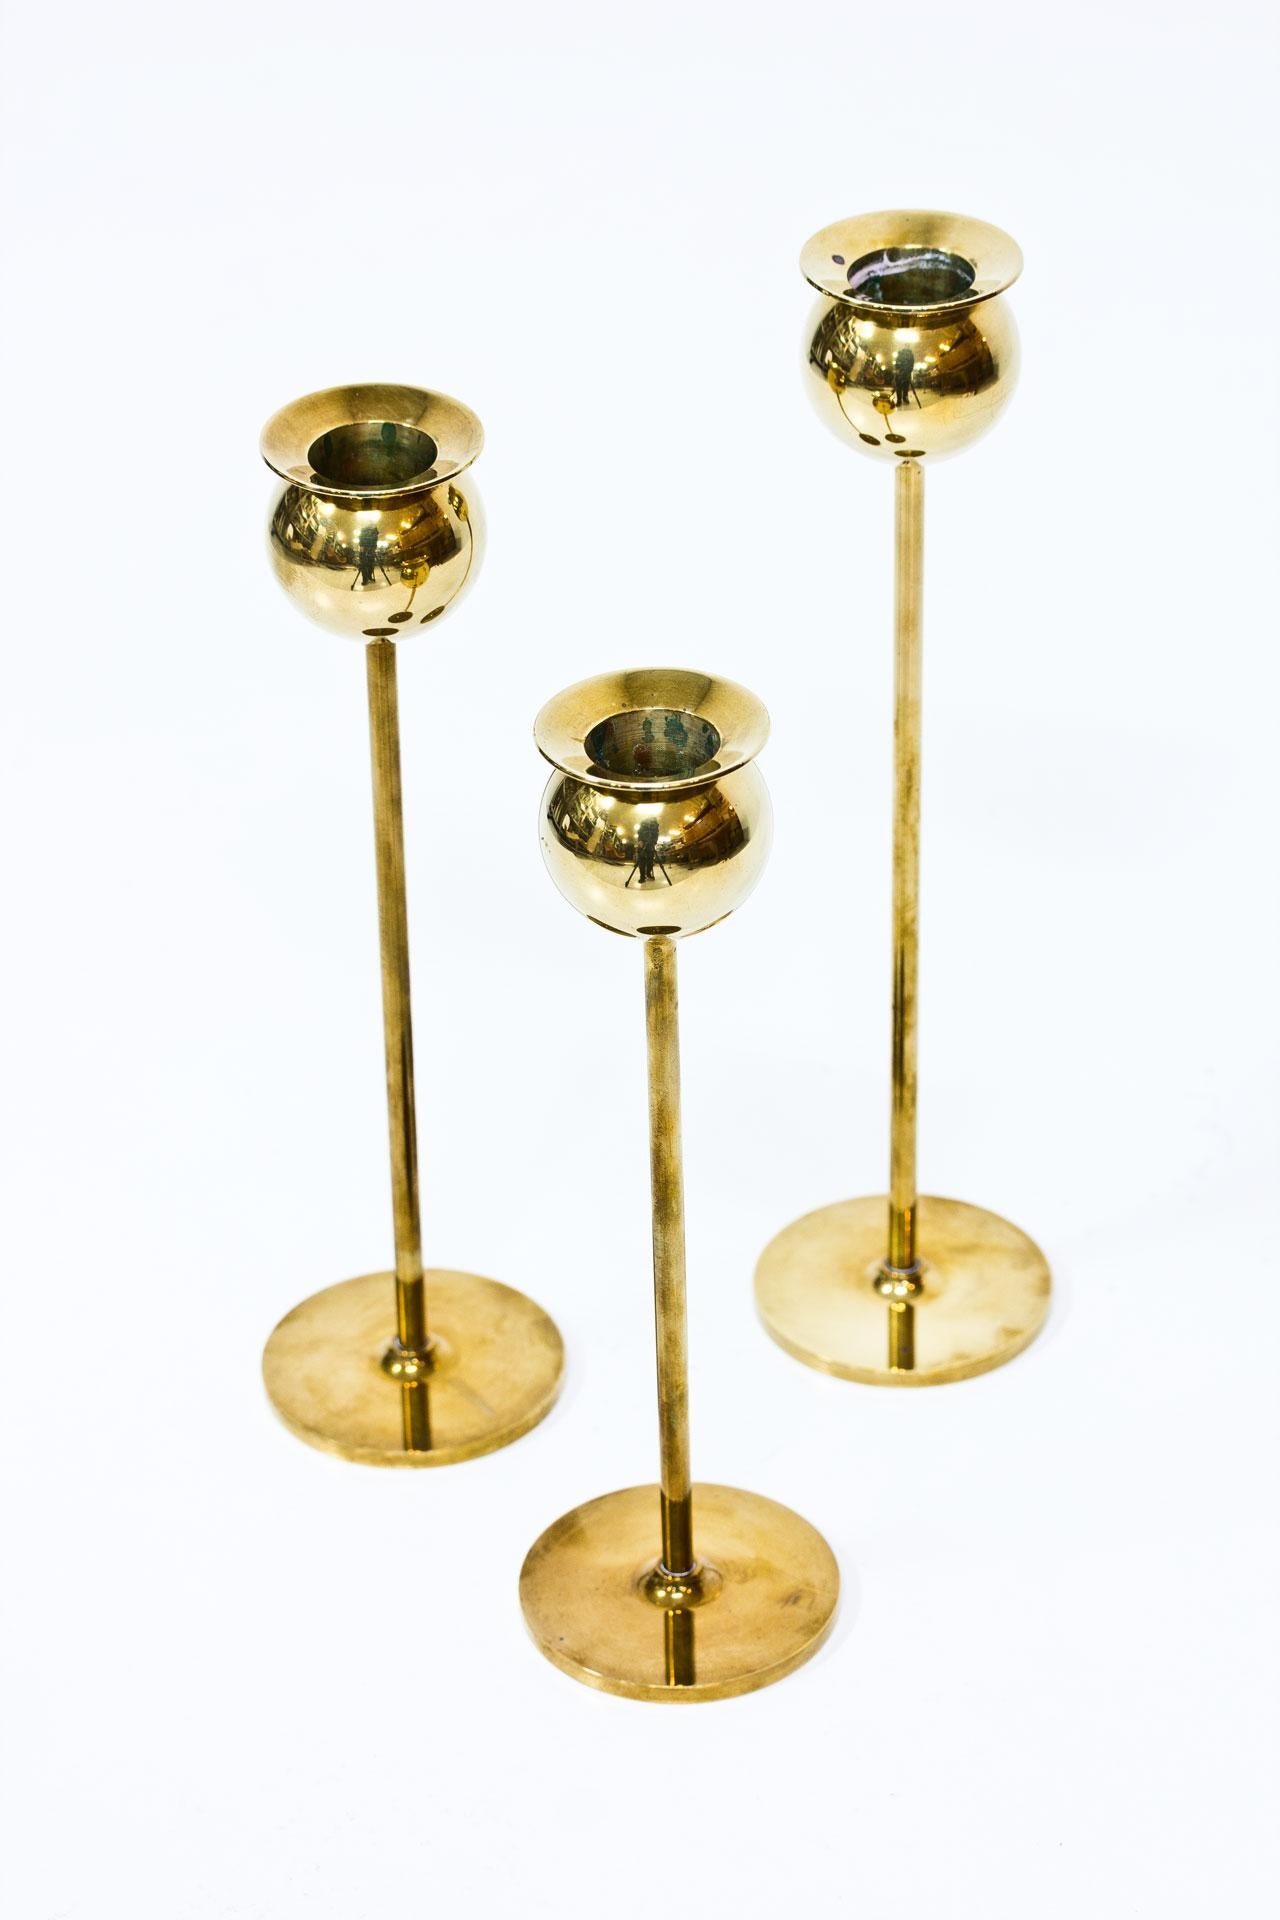 Set of three brass candleholders model “Tulip” designed by Pierre Forssell for Skultuna during the 1970s. Coming with the original box. Candlesticks are engraved and bow stamped Skultuna 1607.

Height 19 to 23cm